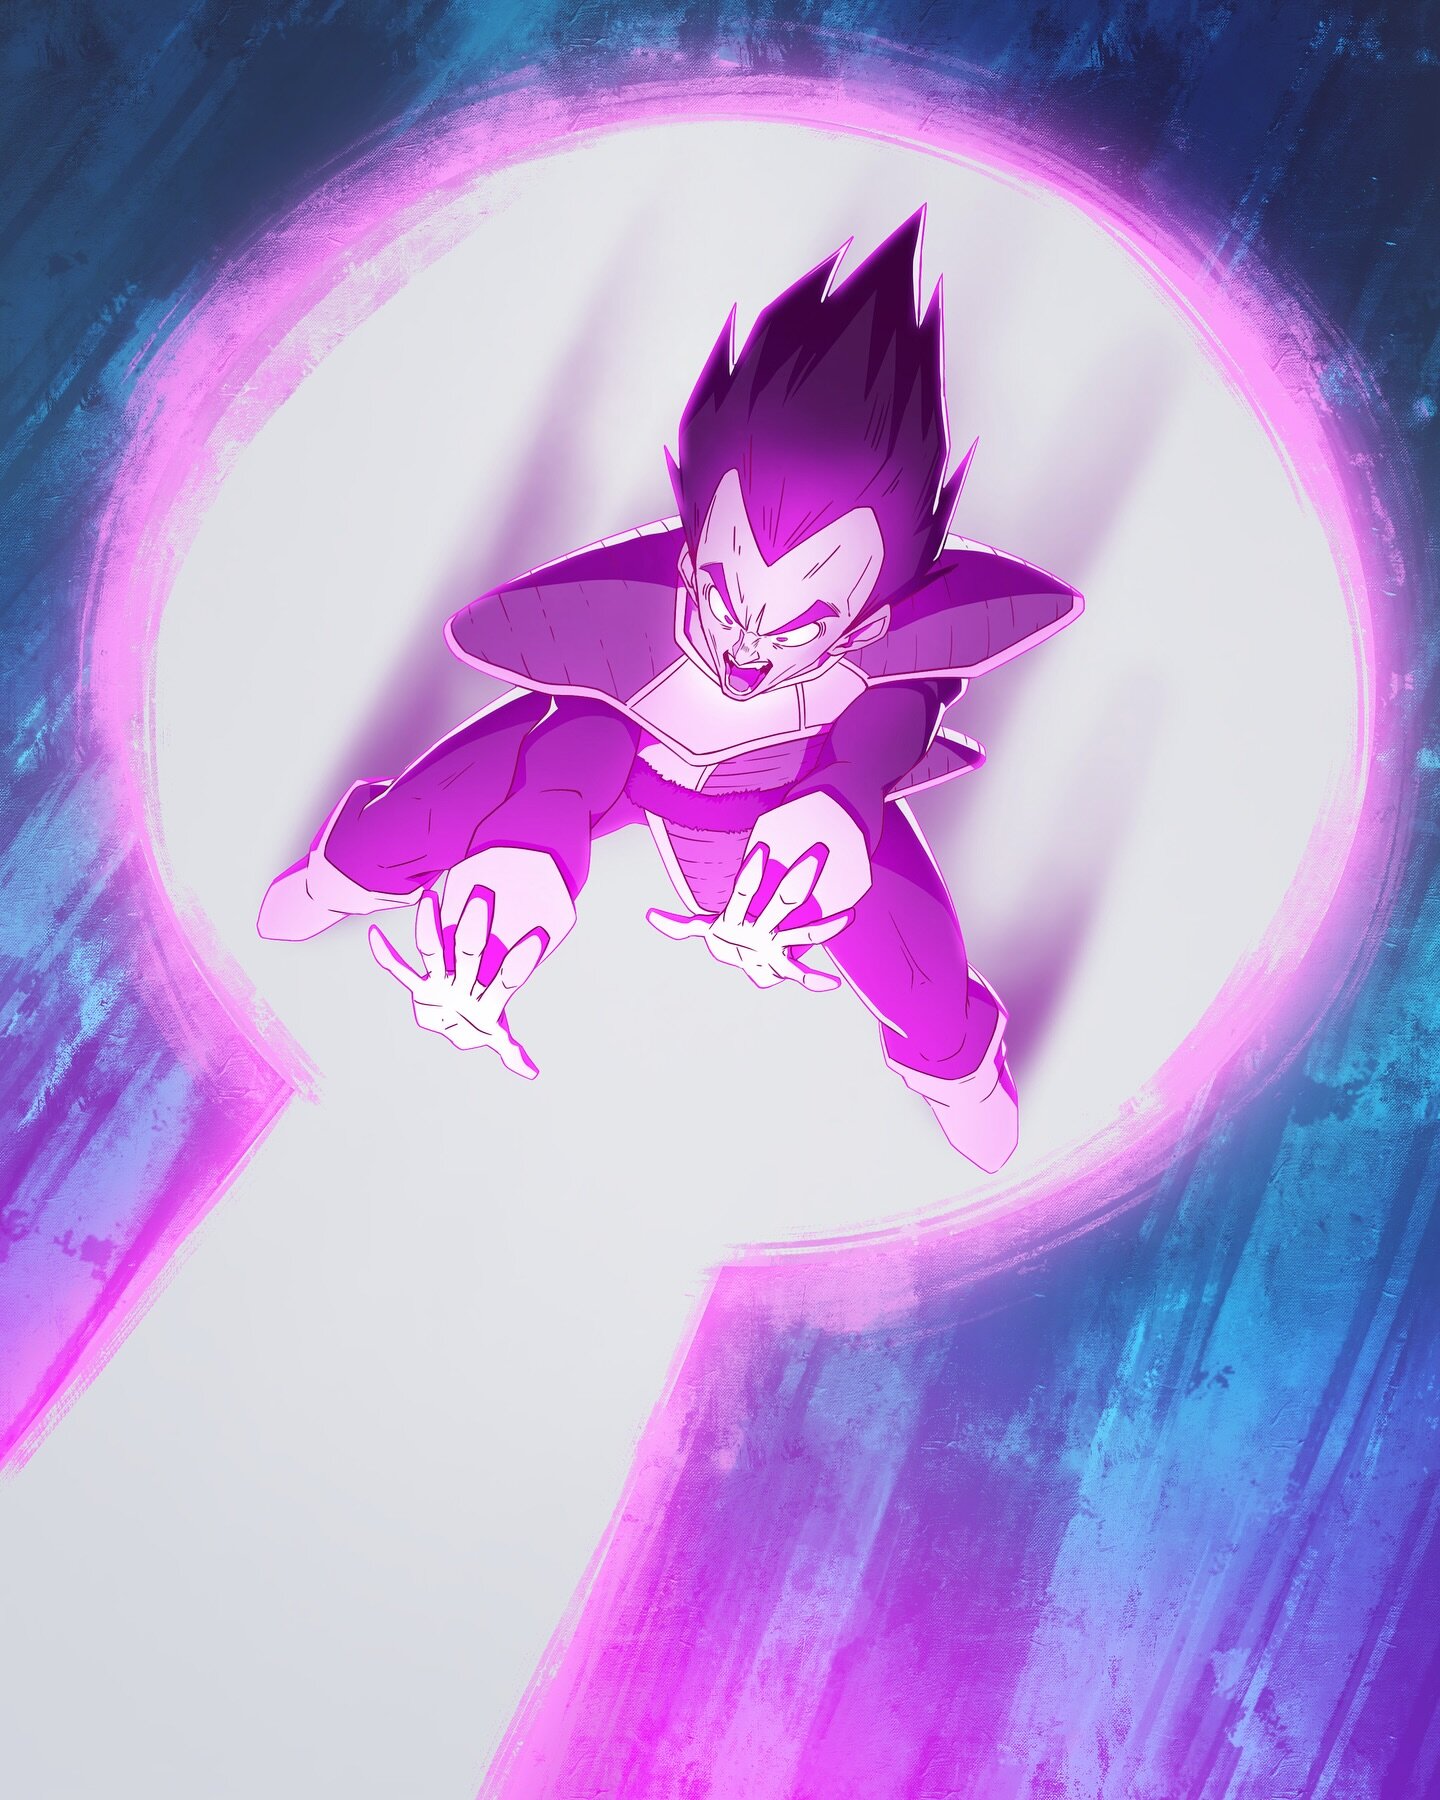 Vegeta&rsquo;s Galick Gun was one of those really cool moments when I was a kid watching it on toonami. I don&rsquo;t do a lot of fan art but Im just trying to do more stuff and not really thinking too much about it.
&mdash;
#art #artist #fanart #dra